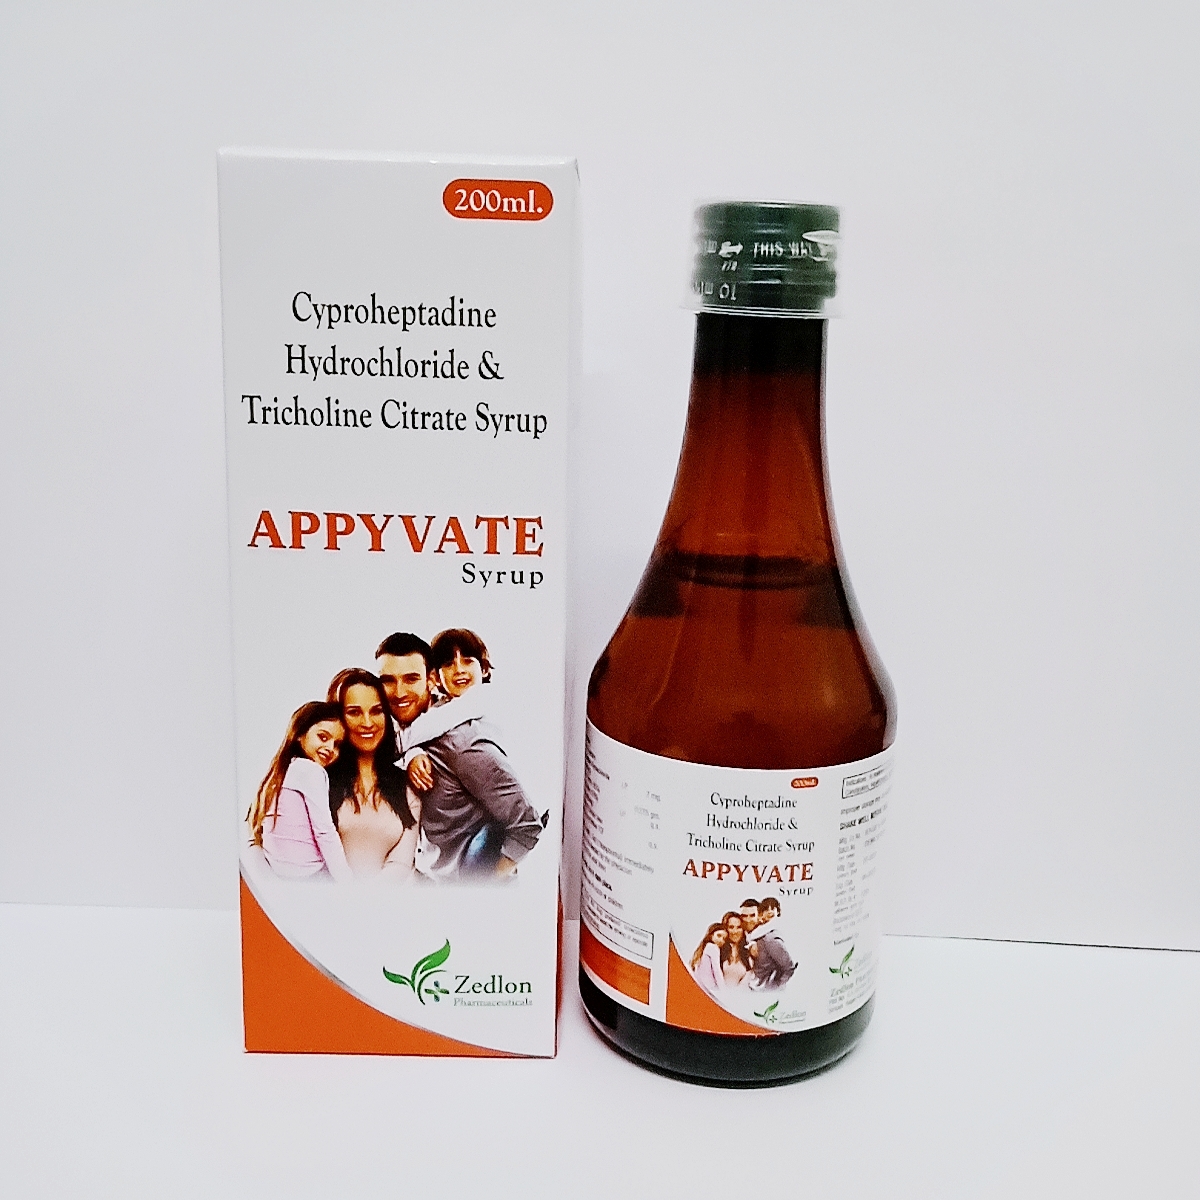 APPYVATE Syrups